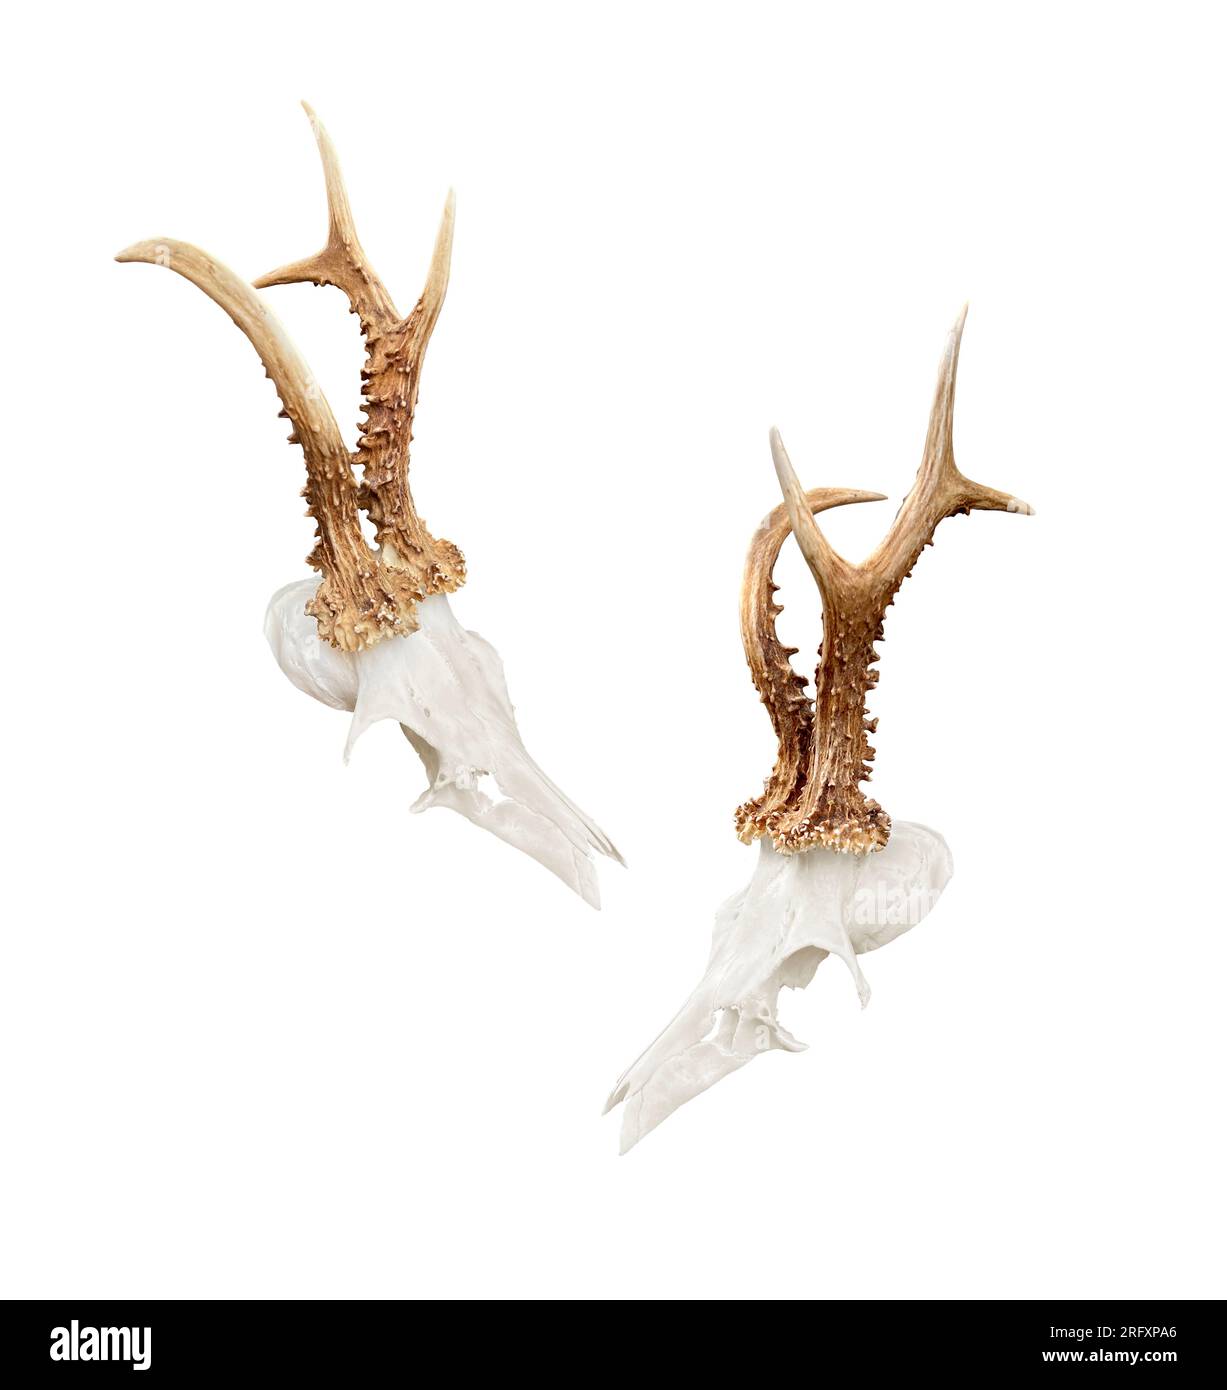 Rare roe deer buck, roebuck skull with unique, abnormal antlers - both sides, isolated on white background. Stock Photo